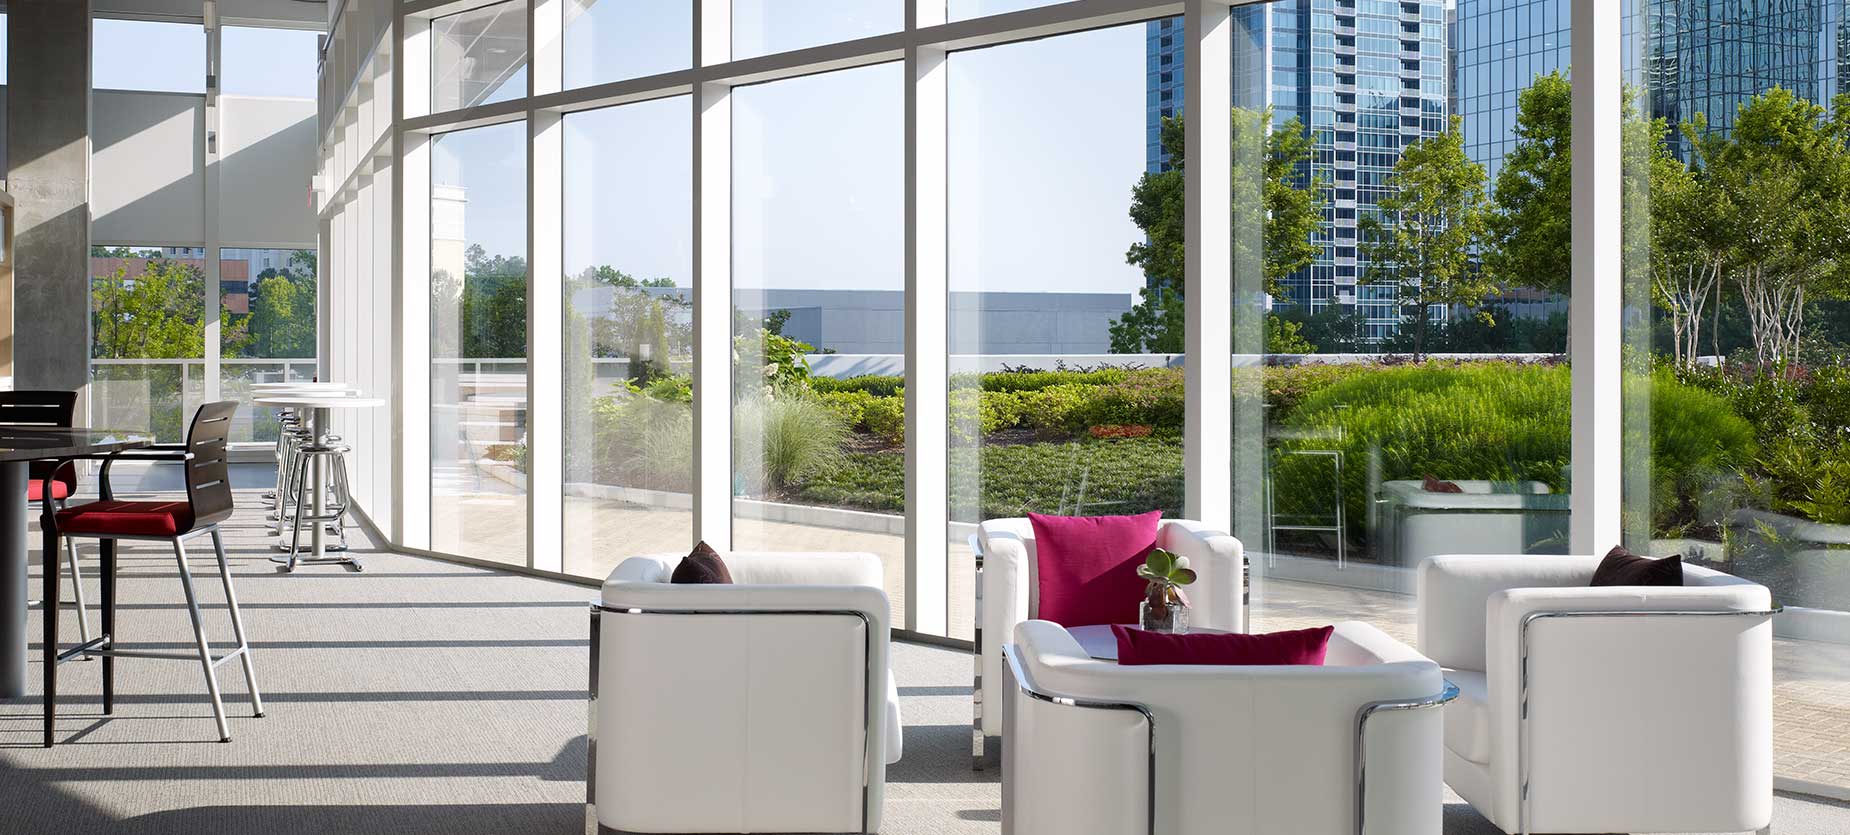 This Social Space that provides comfortable seating in a variety of postures to encourage interaction and collaboration. Views to the Atlanta skyline and exterior gardens contribute to the ambience.